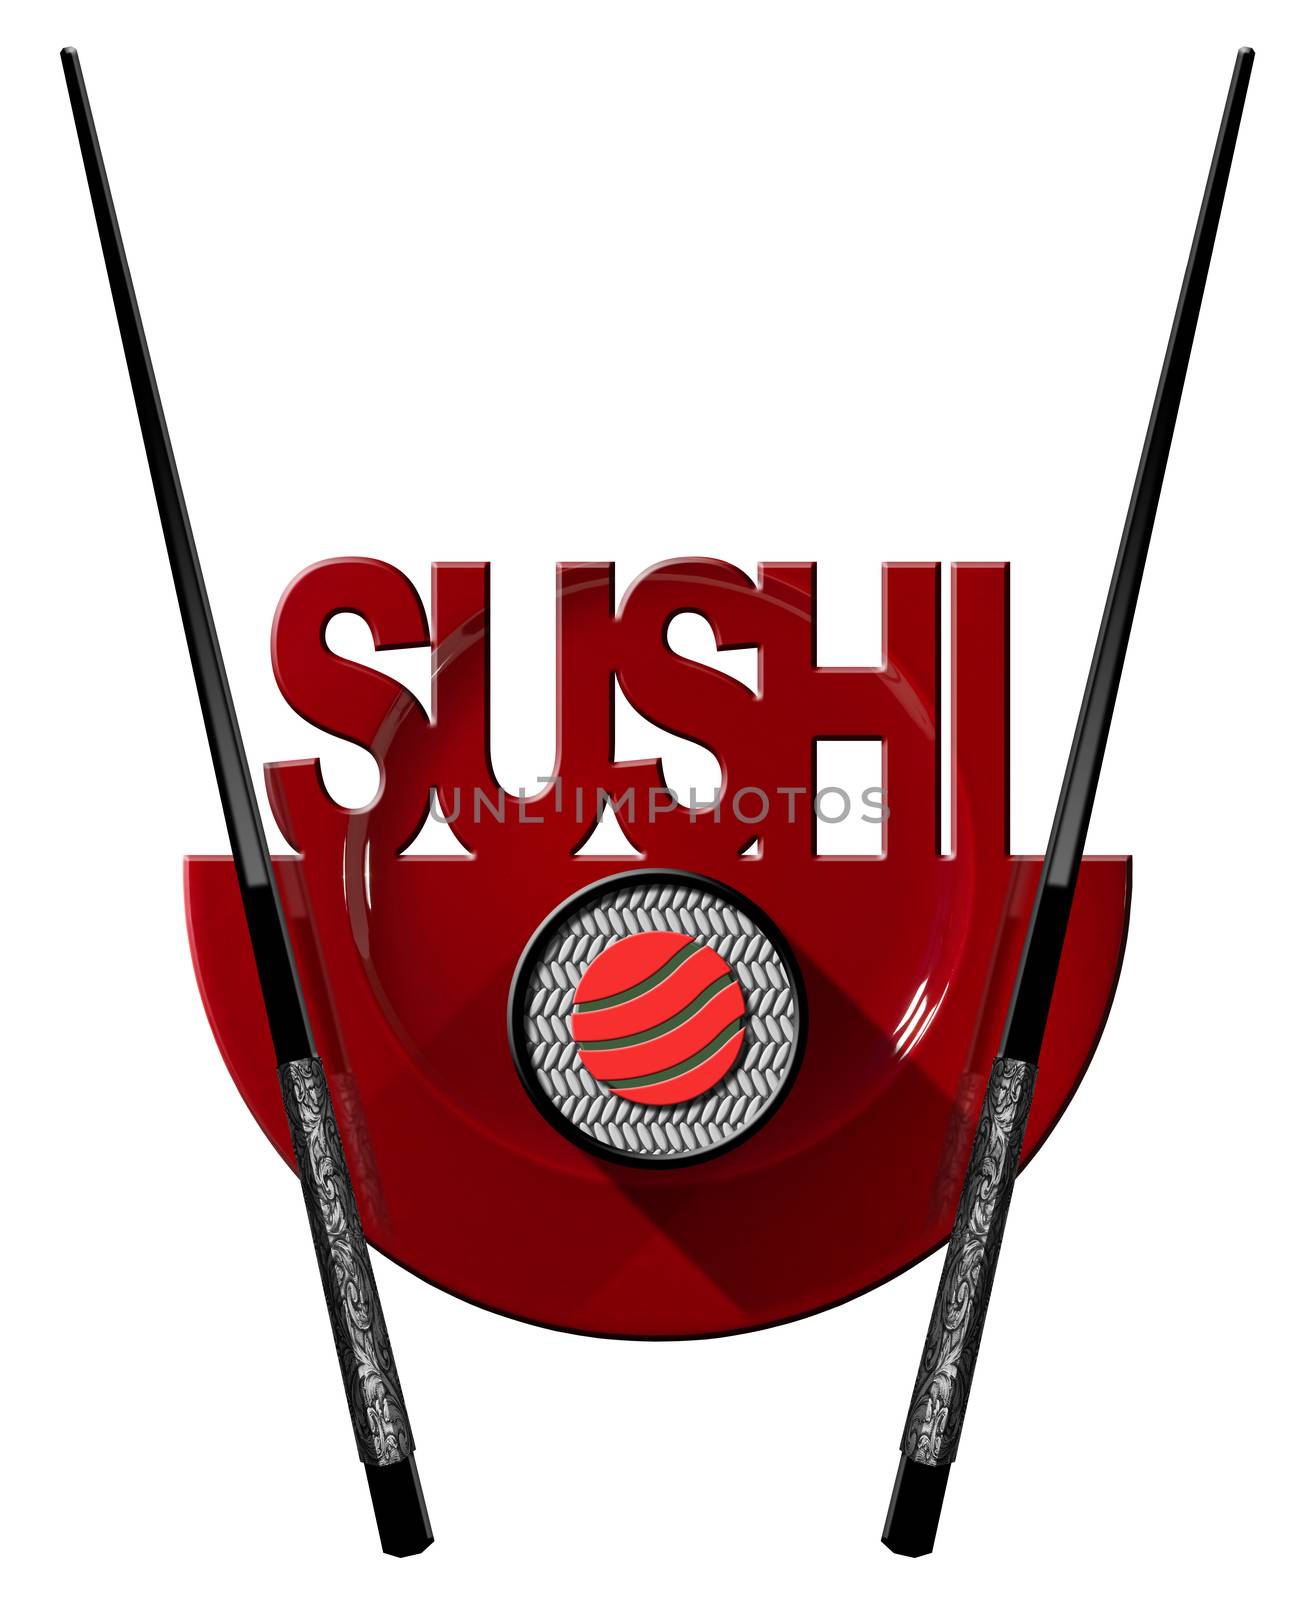 Sushi - Symbol with Plate and Chopsticks by catalby